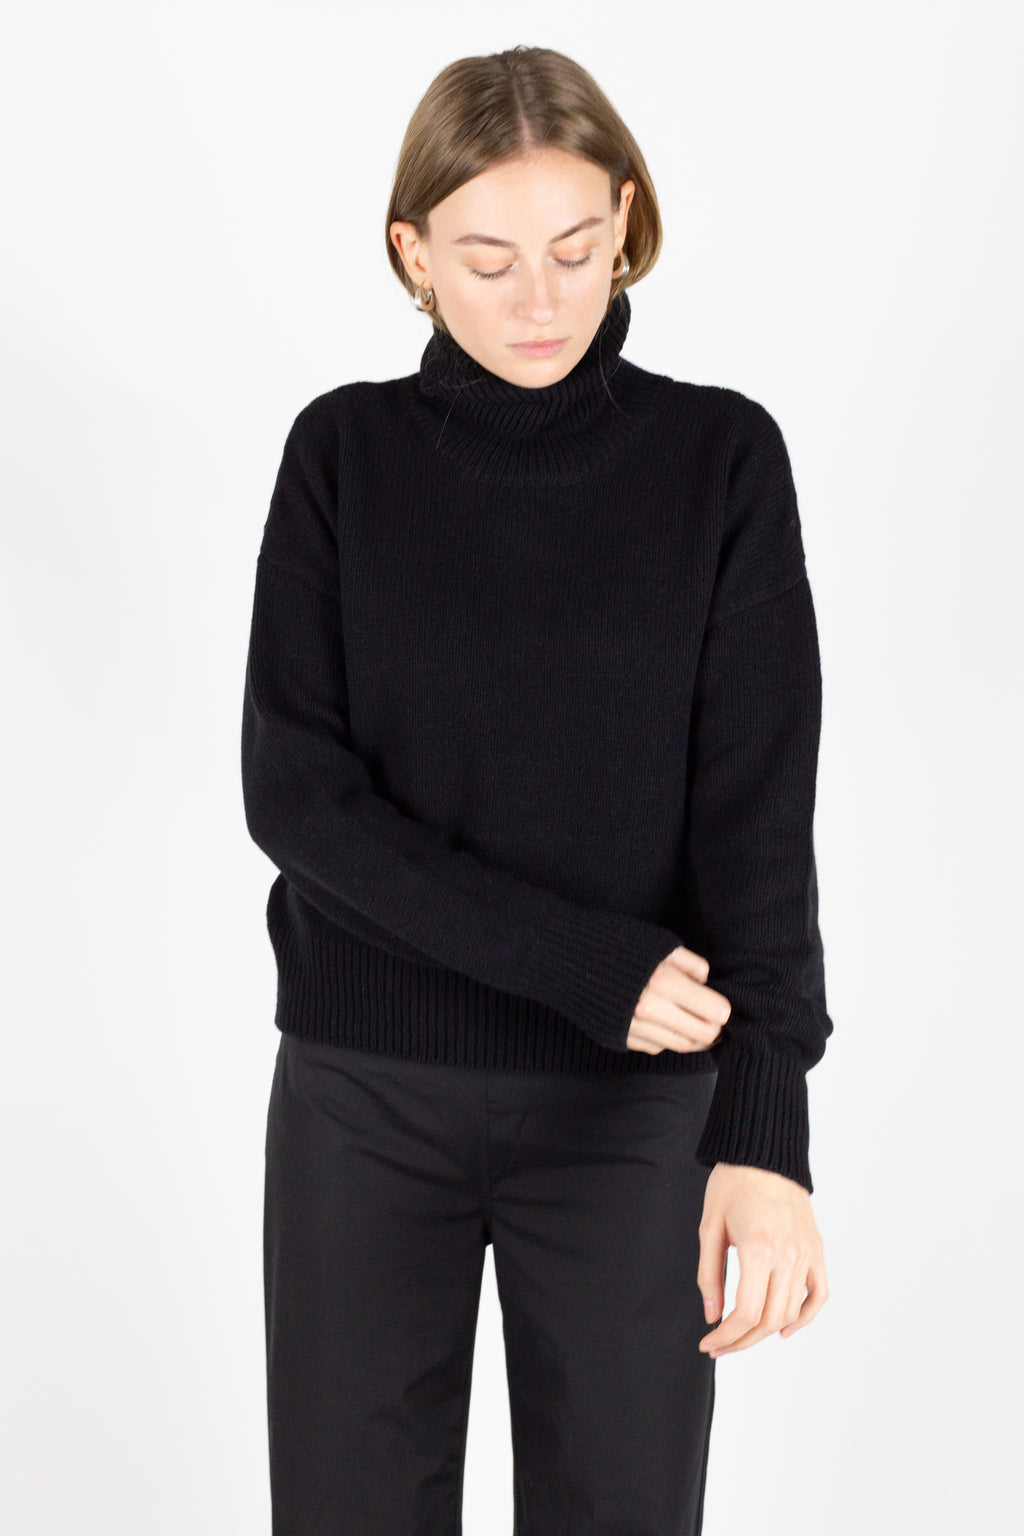 Cashmere roll neck sweater black. Rib knitted neck, cuffs and hem.